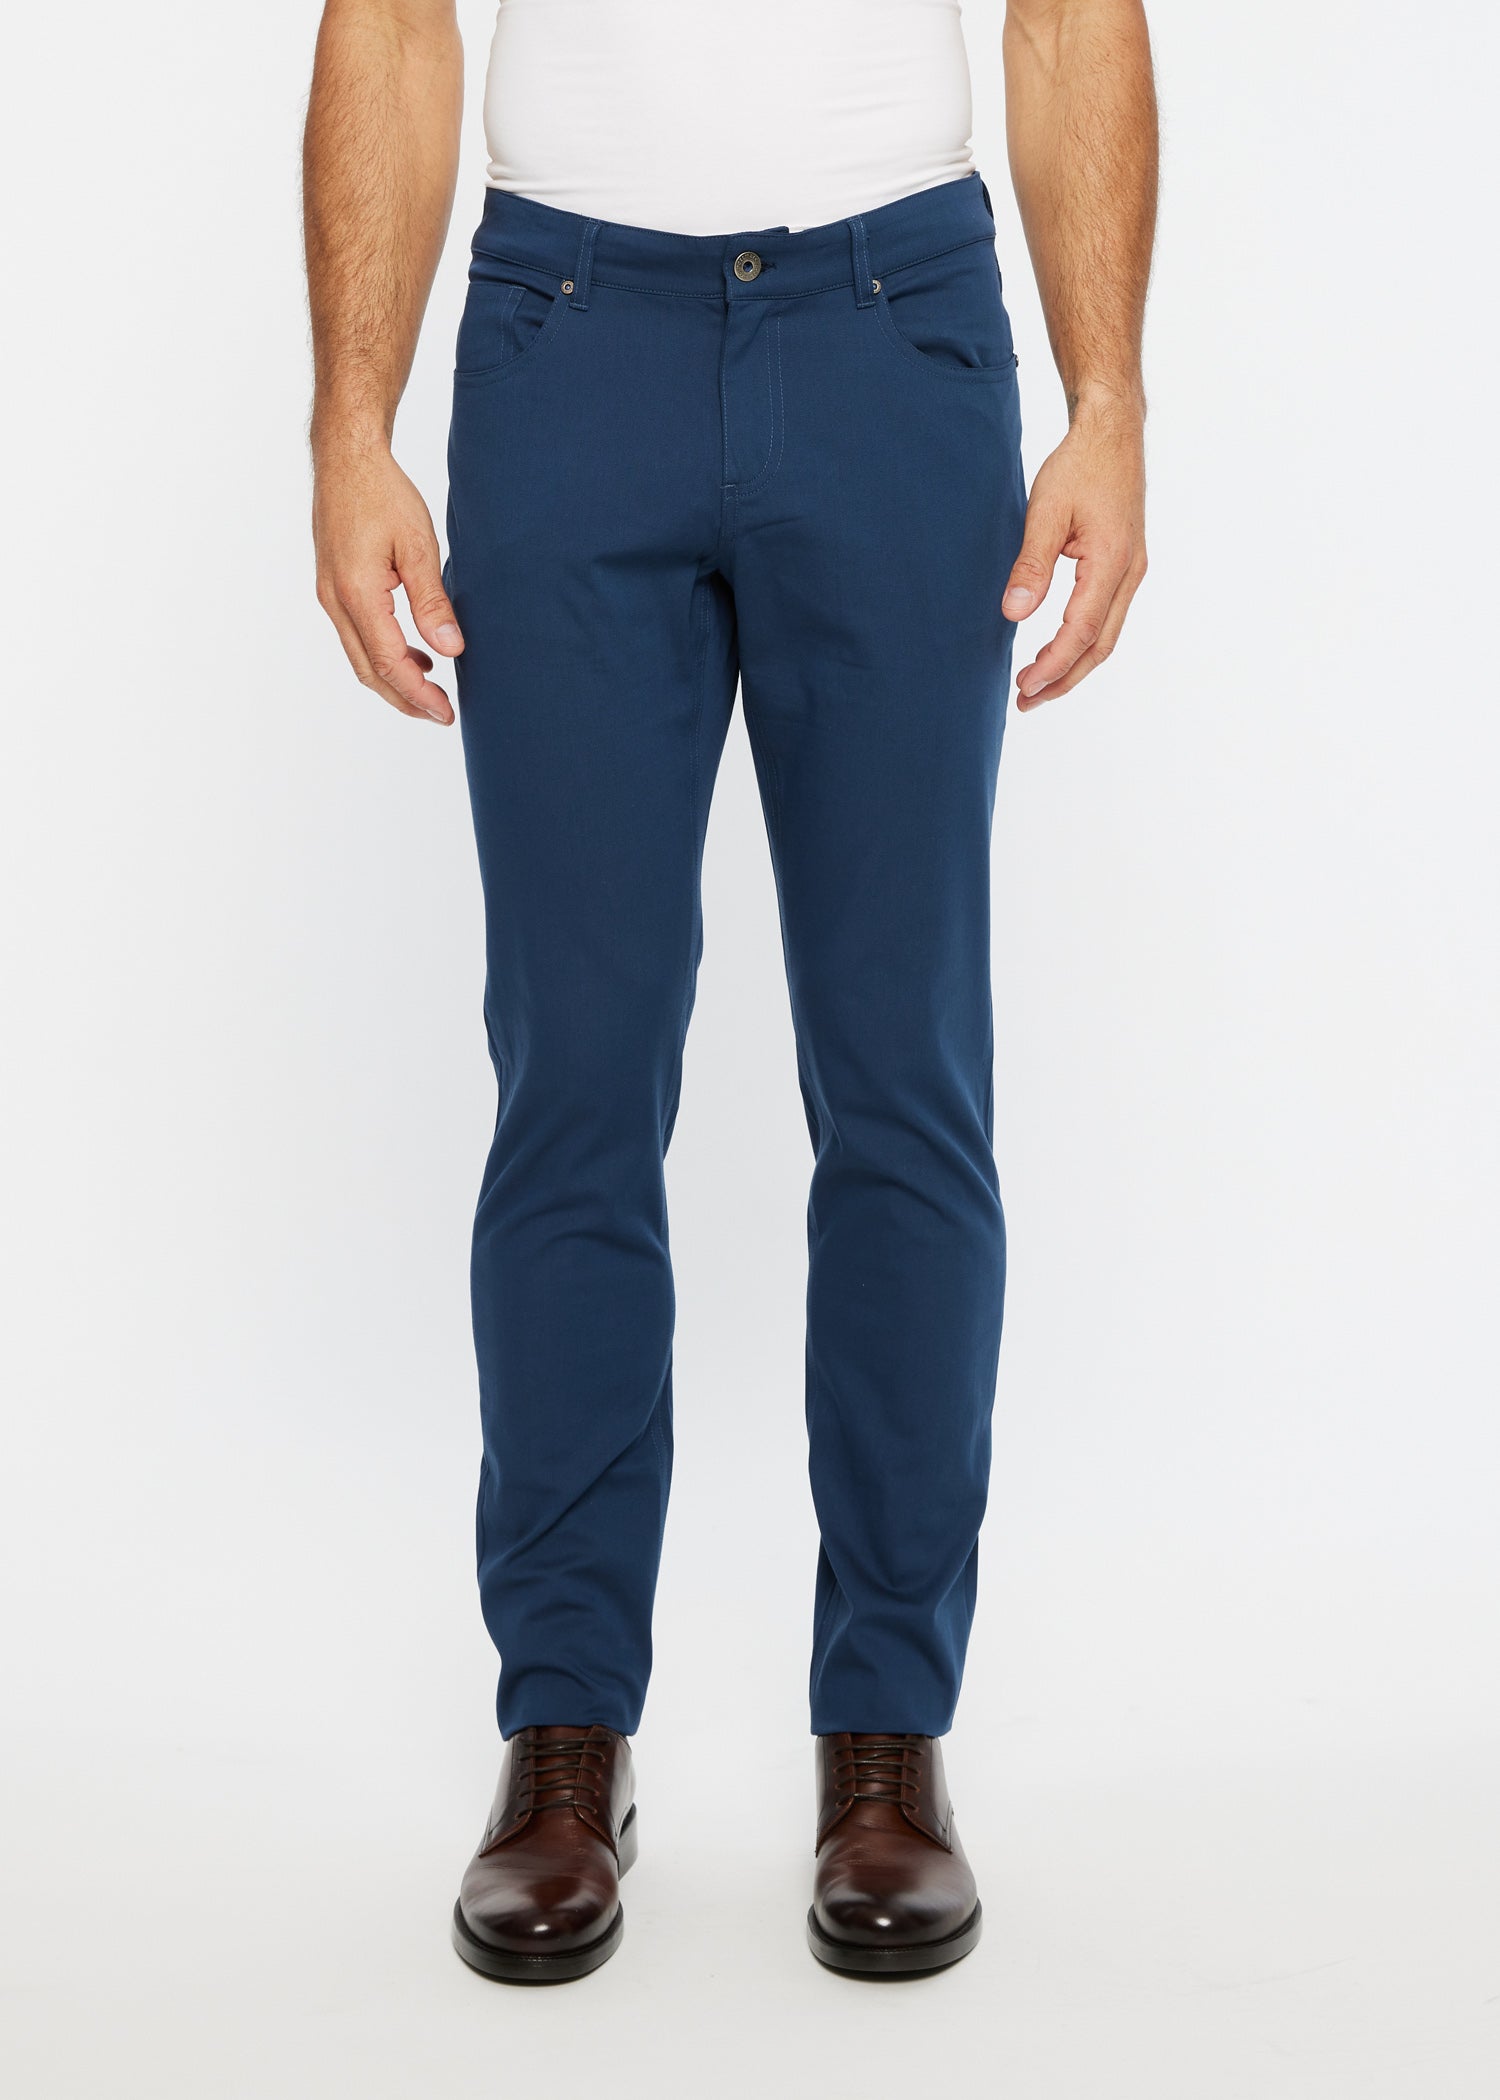 TEXTURED 5 POCKET STRETCH WOVEN JEANS - DealByEthan.gay